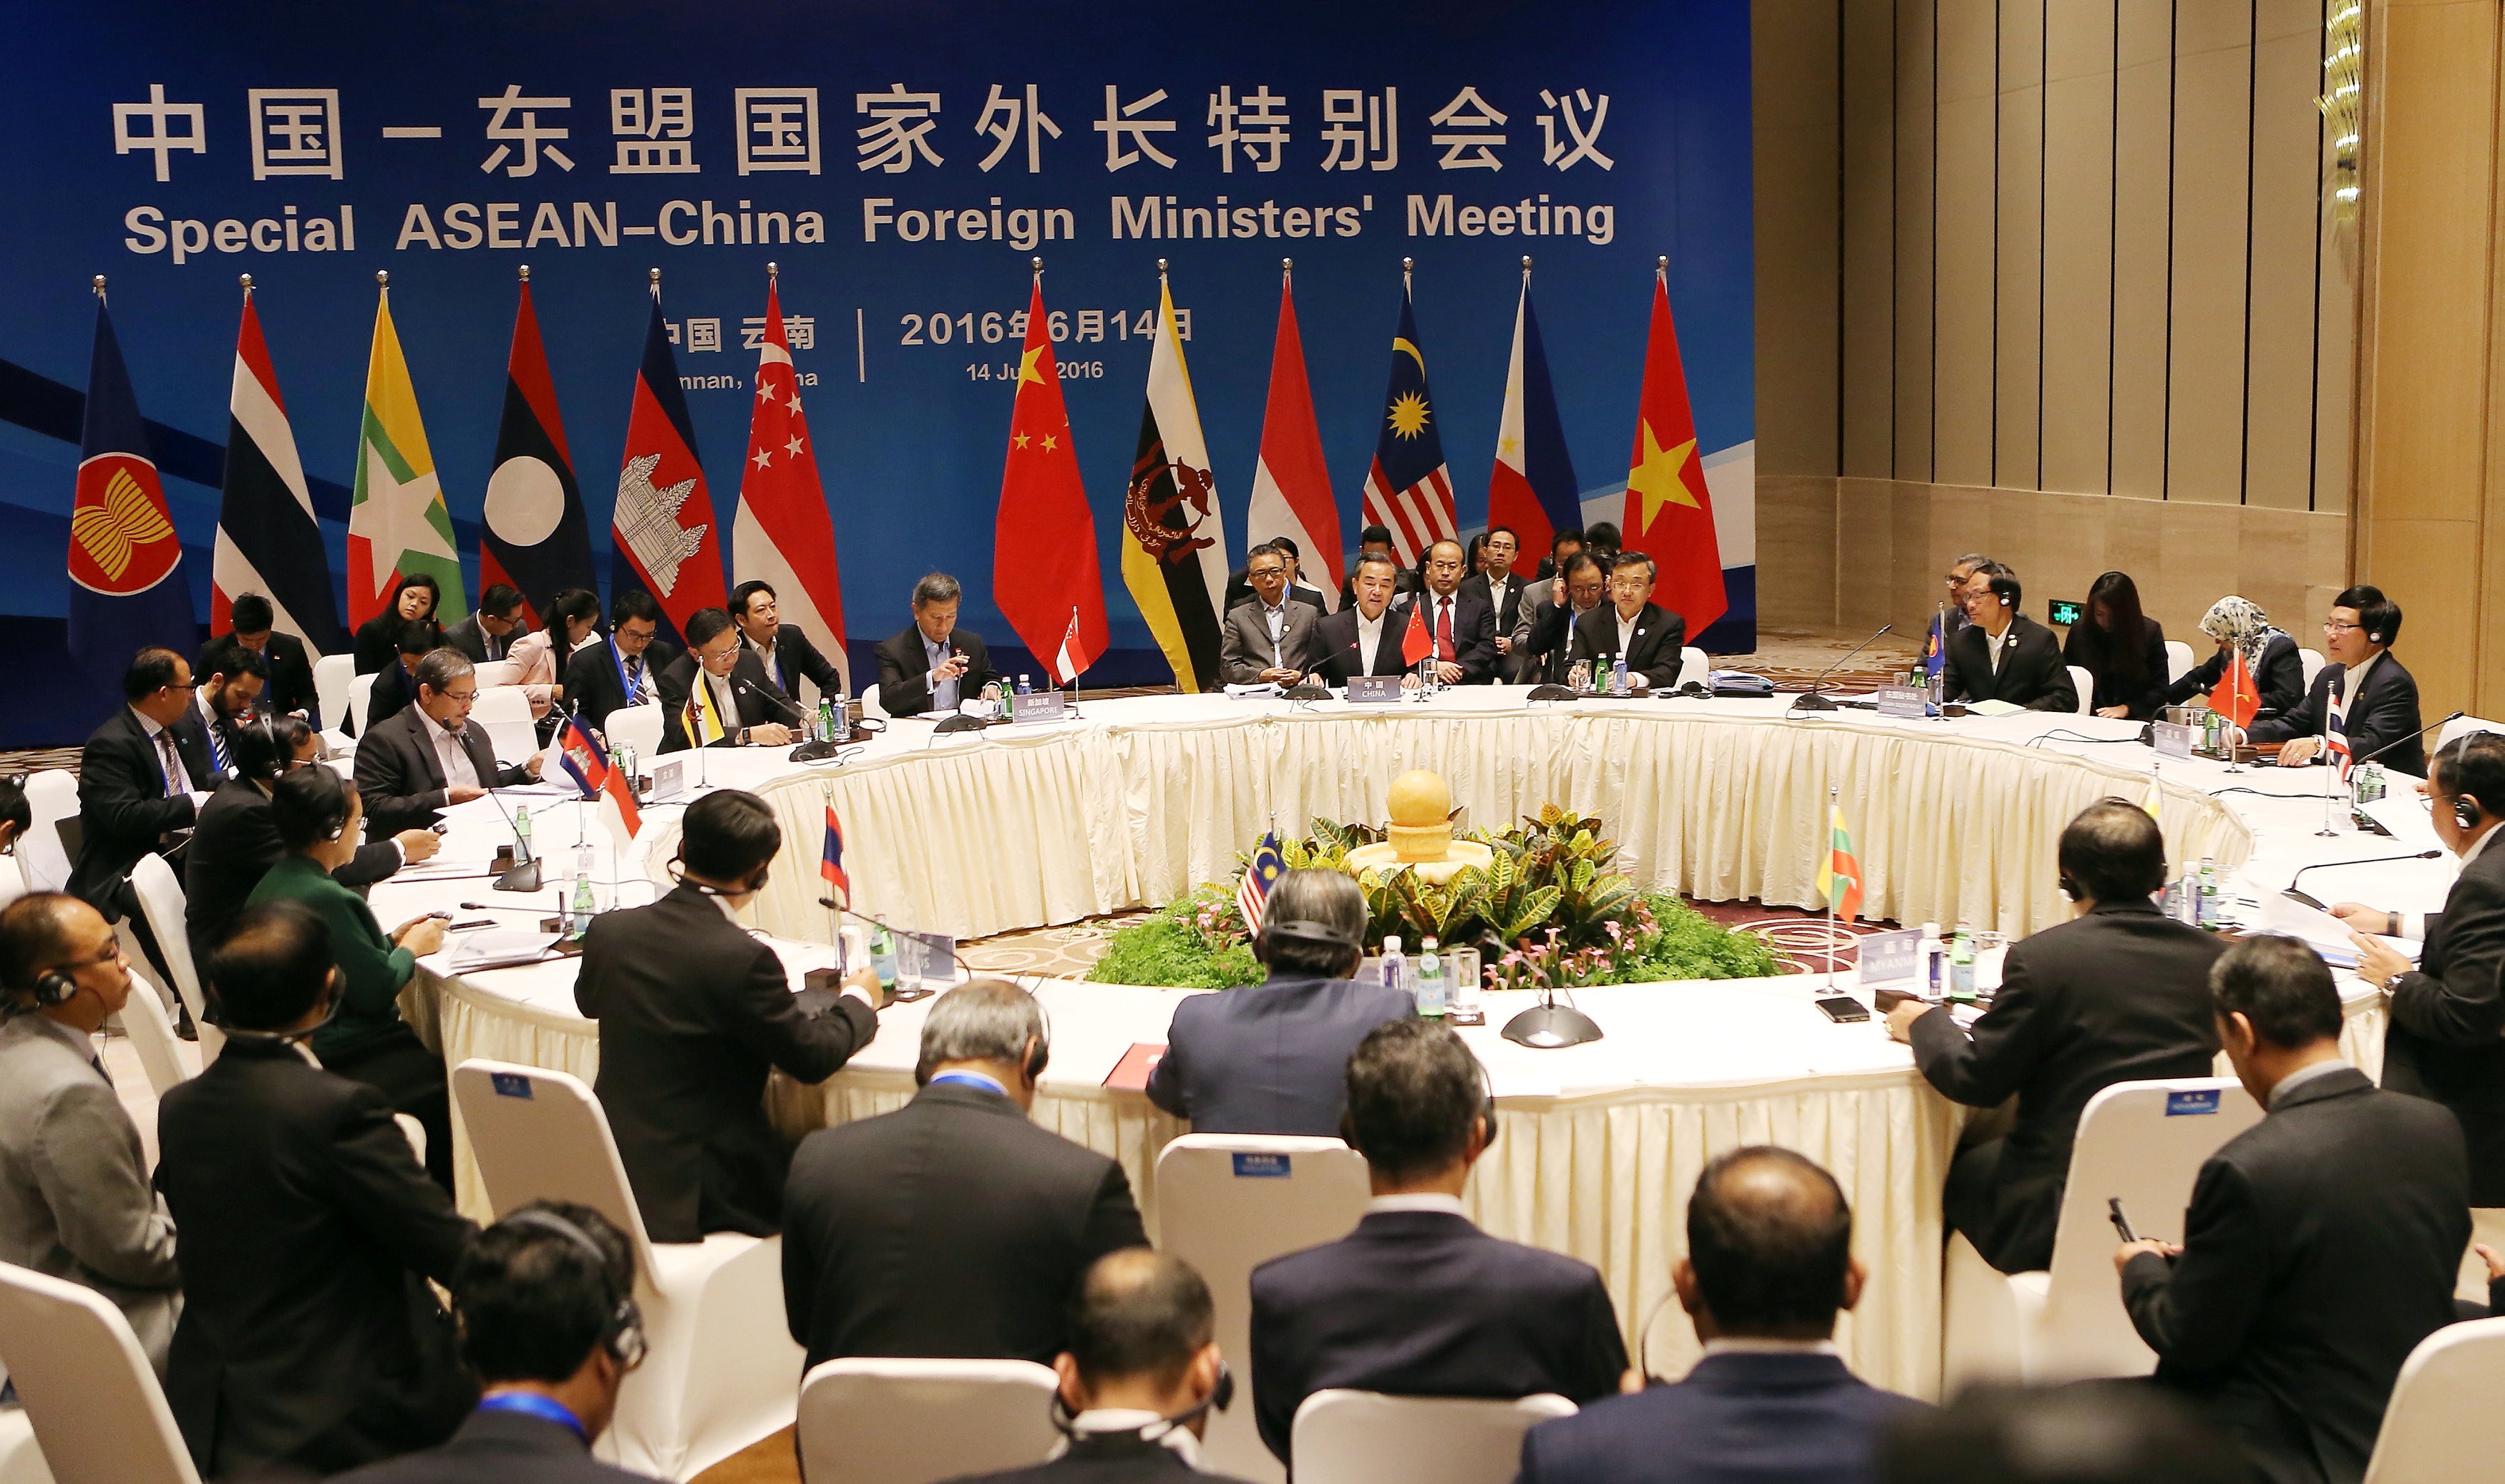 Singapore is currently responsible for dialogue between China and the Asean nations. Photo: AFP